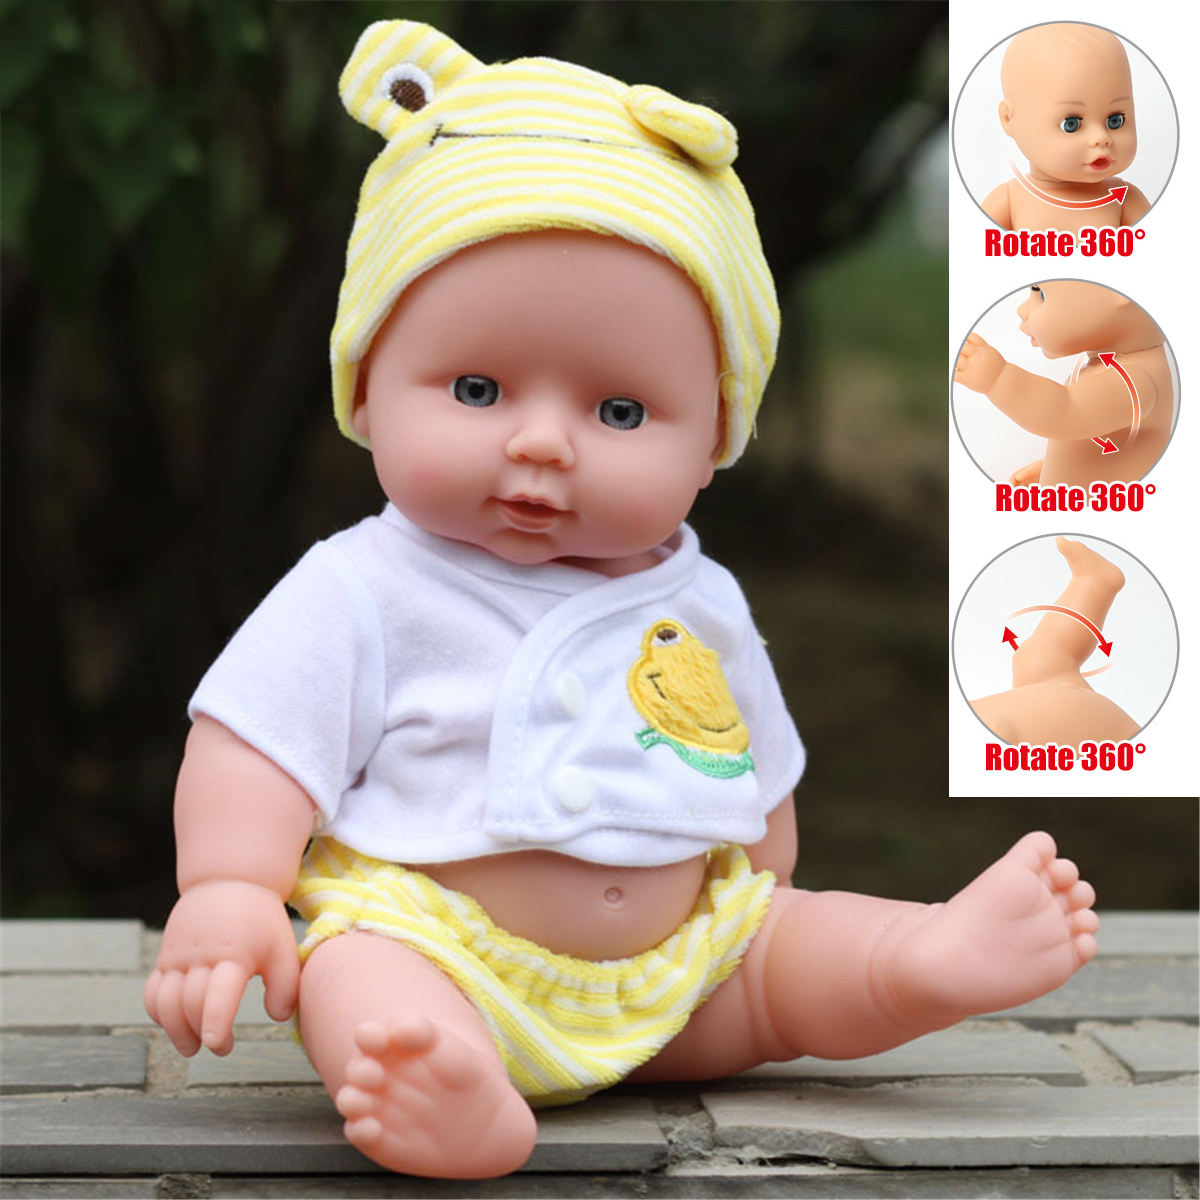 30CM-Height-Simulation-Soft-Silicone-Vinyl-Joint-Removable-Washable-Reborn-Baby-Doll-Toy-for-Kids-Bi-1812138-4